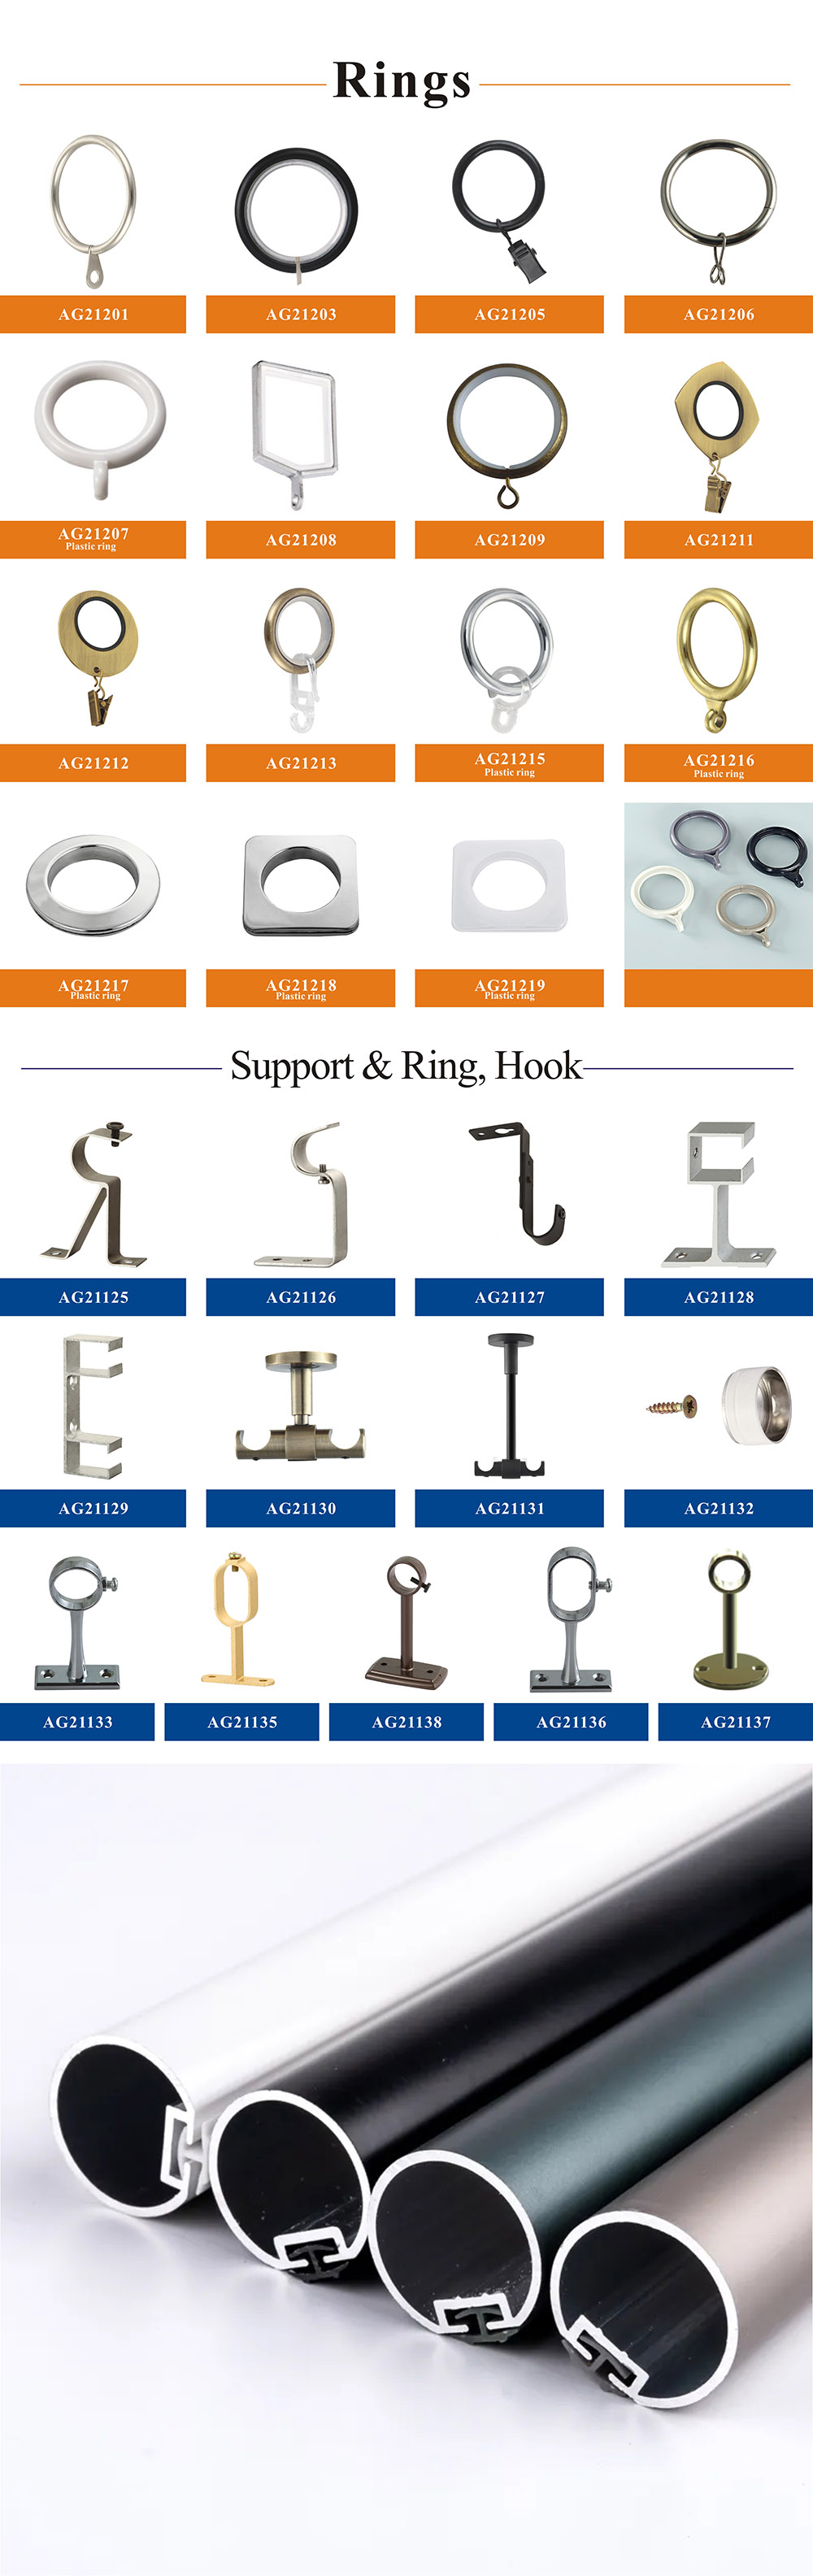 Ring Hook Paint